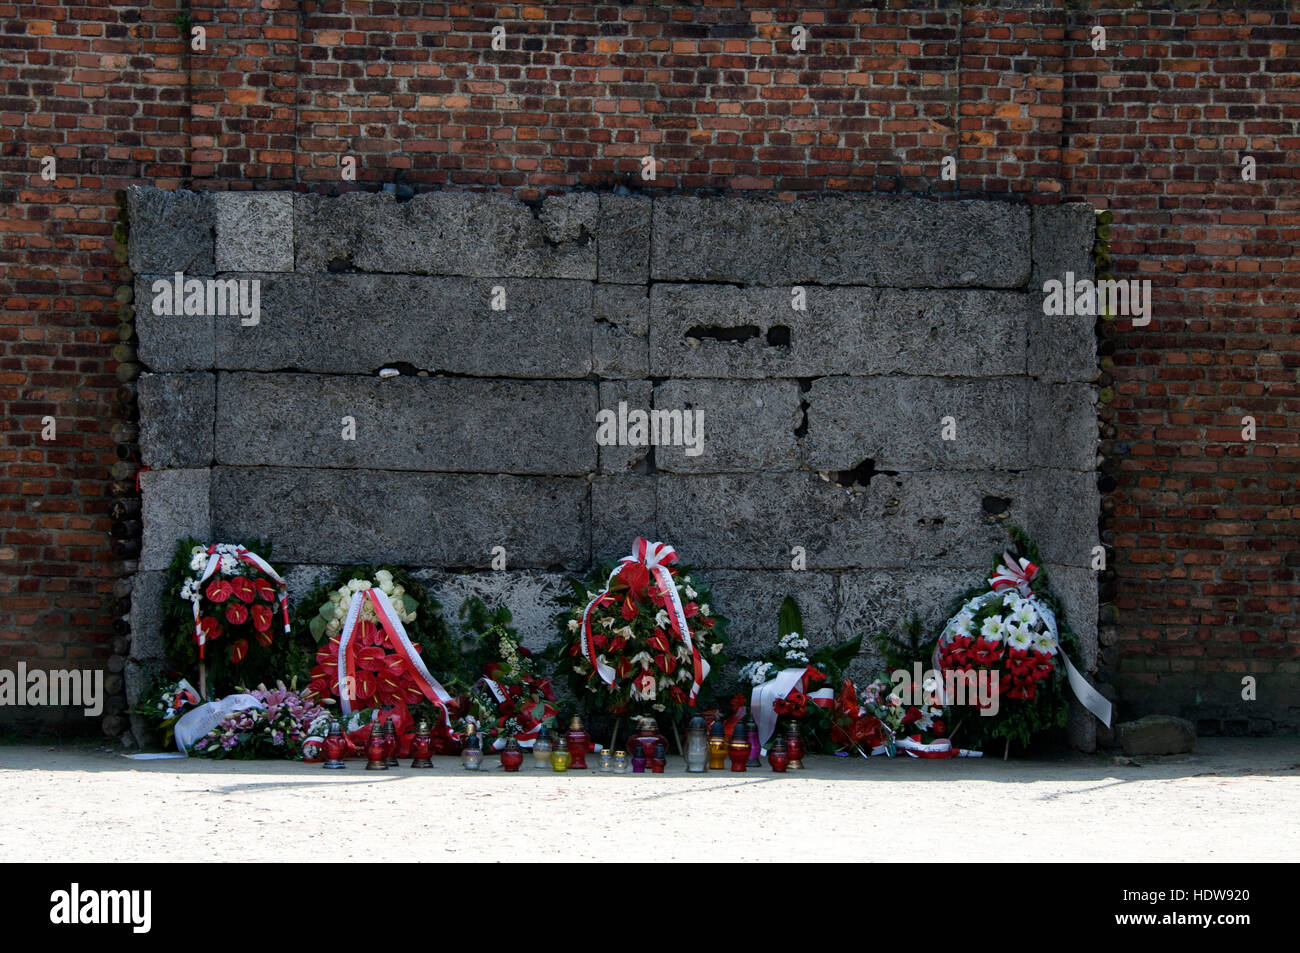 Wreaths laid at he Death Wall at Auschwitz Birkenau, Oswiecim, Poland. The SS shot several thousand people at this wall of death in a yard between blo Stock Photo